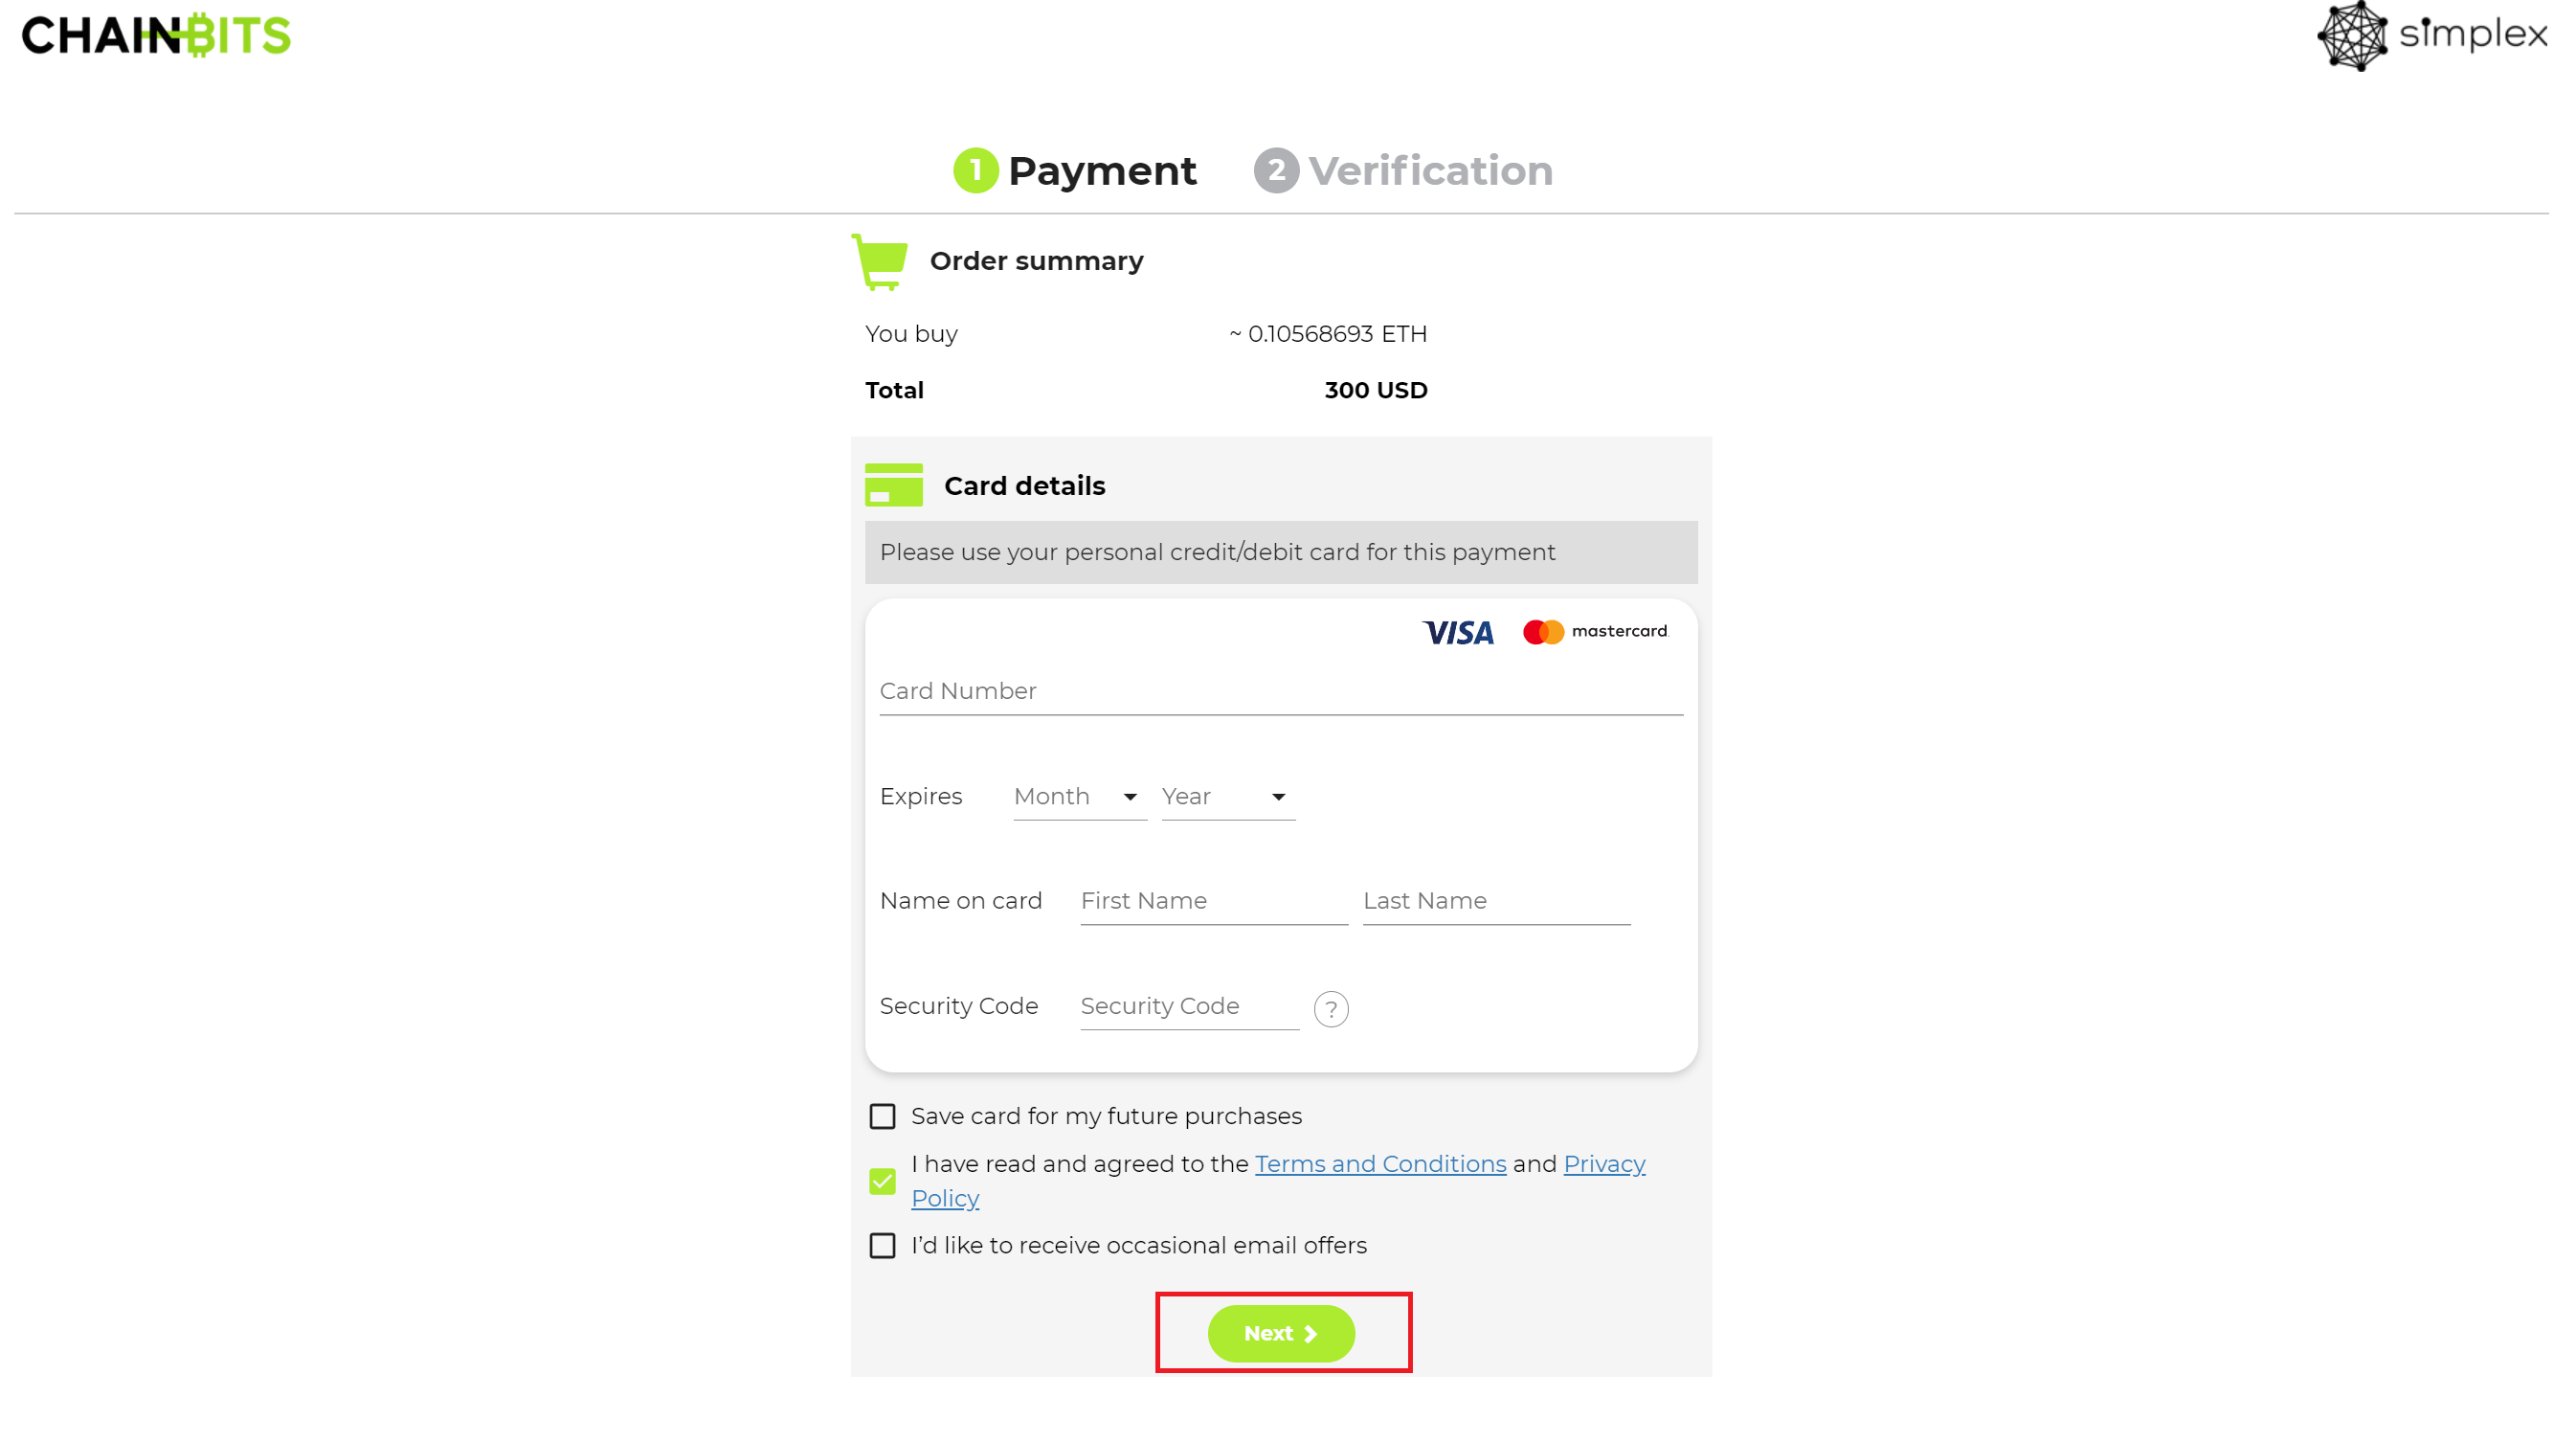 Enter your payment details and press Next